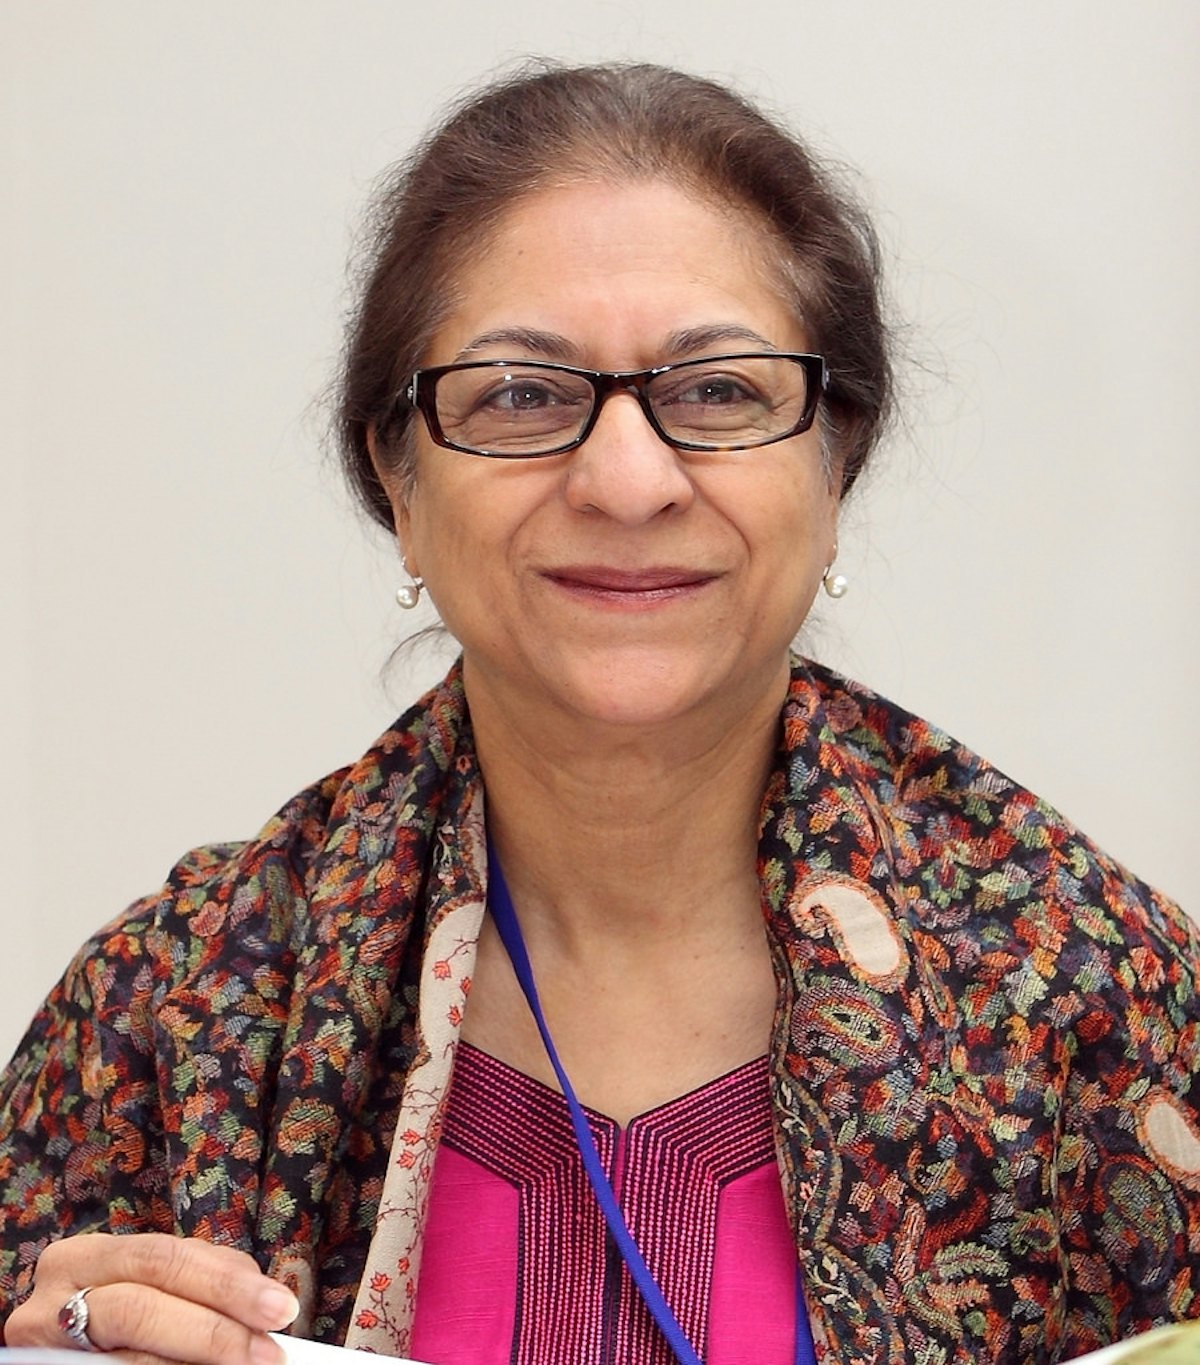 Asma Jahangir was highly regarded for her longstanding dedication to human rights during her life. She passed away at age 66 on Sunday.